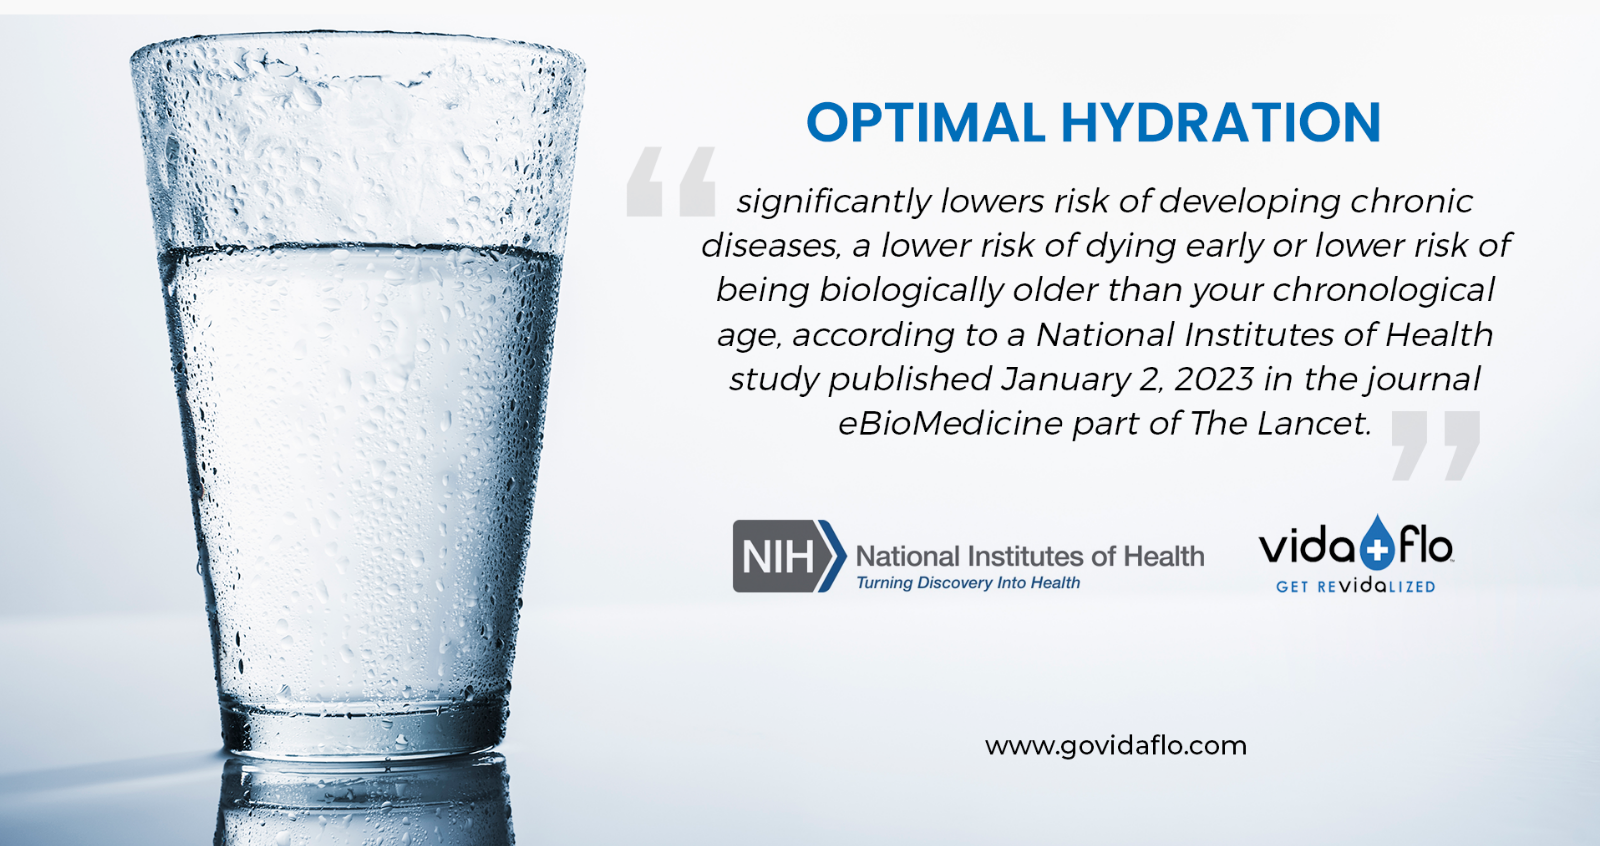 An image of a glass of water with a quote on optimal hydration in Wilmington, NC.